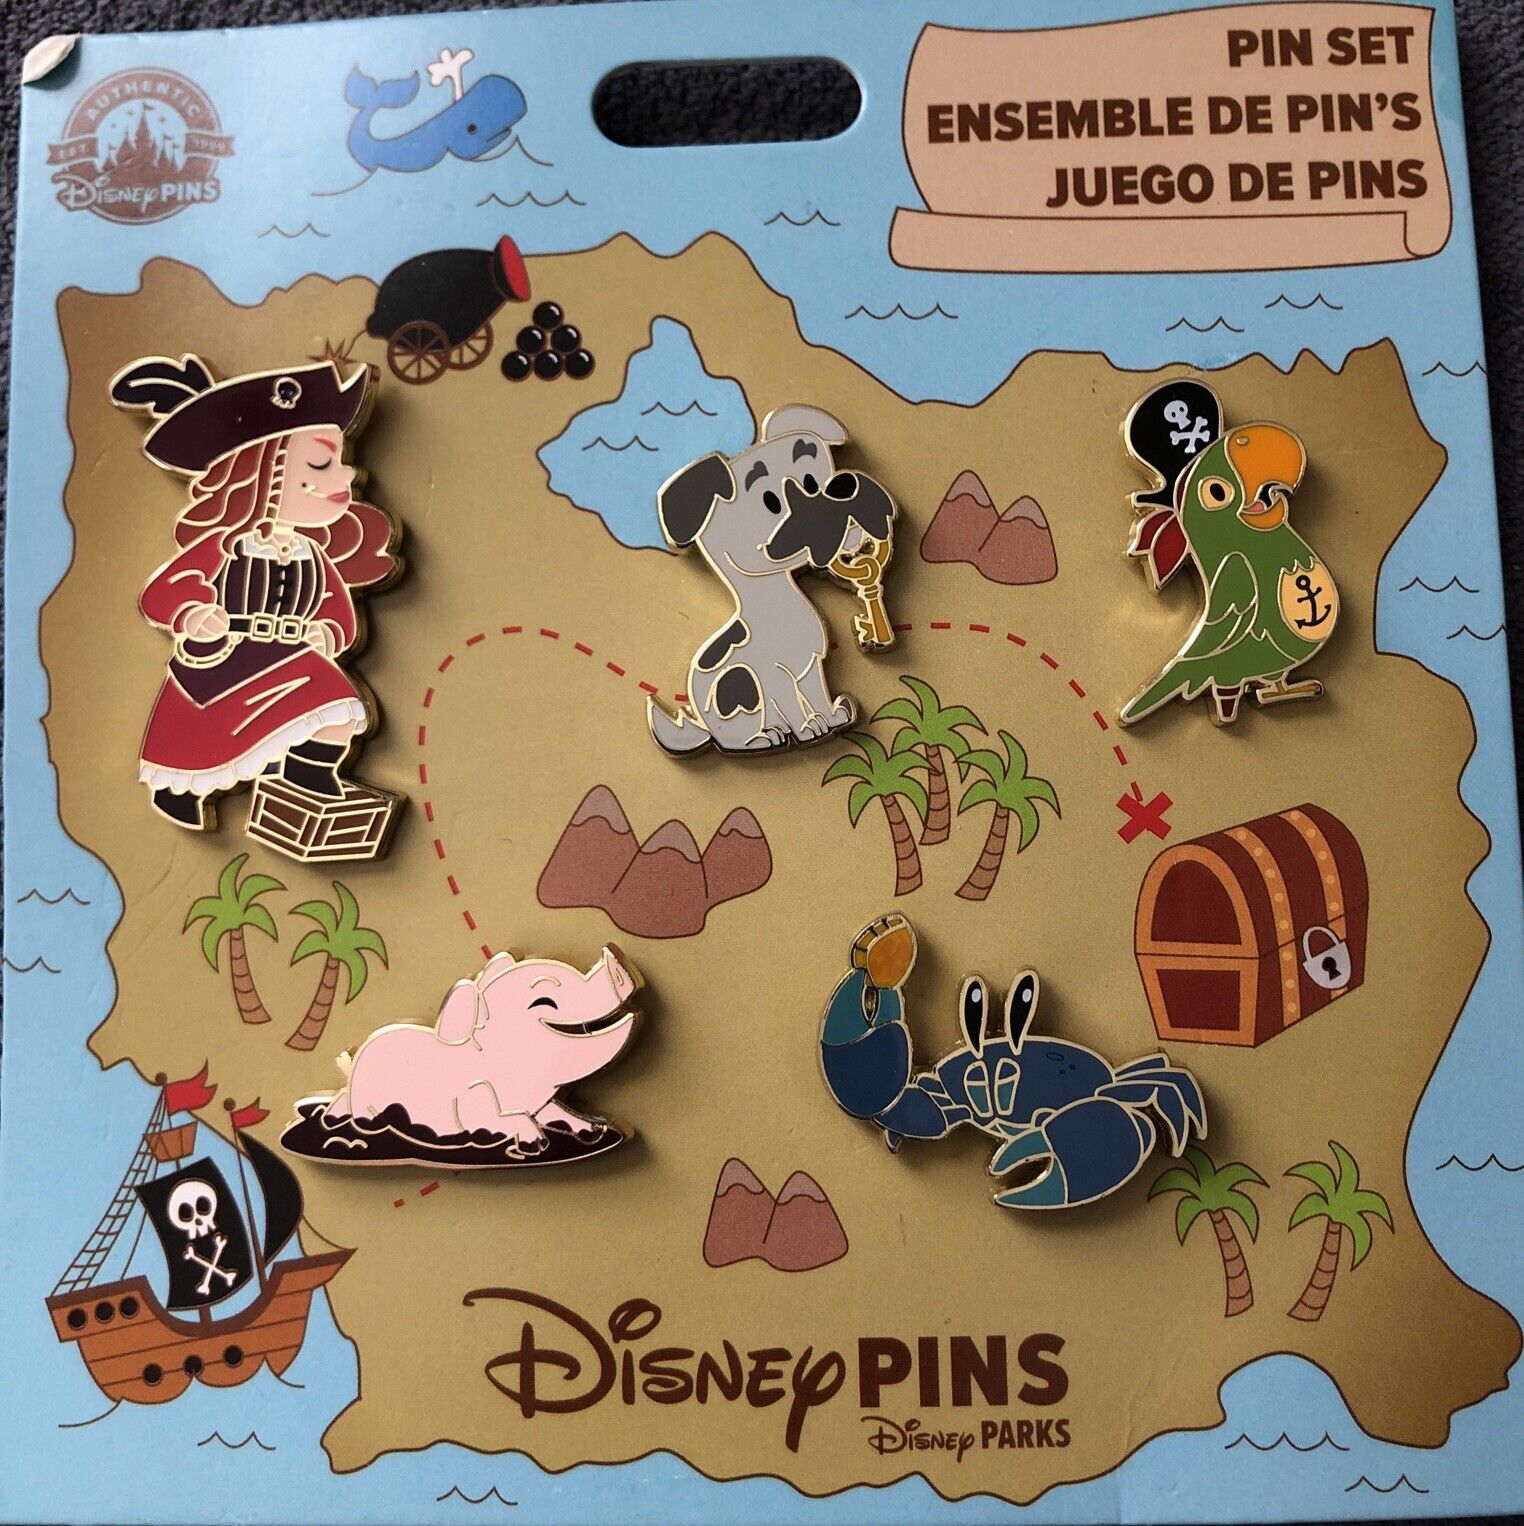 Disney Parks Pirates Of The Caribbean Red Key Dog Parrot Booster Set 5 Pins